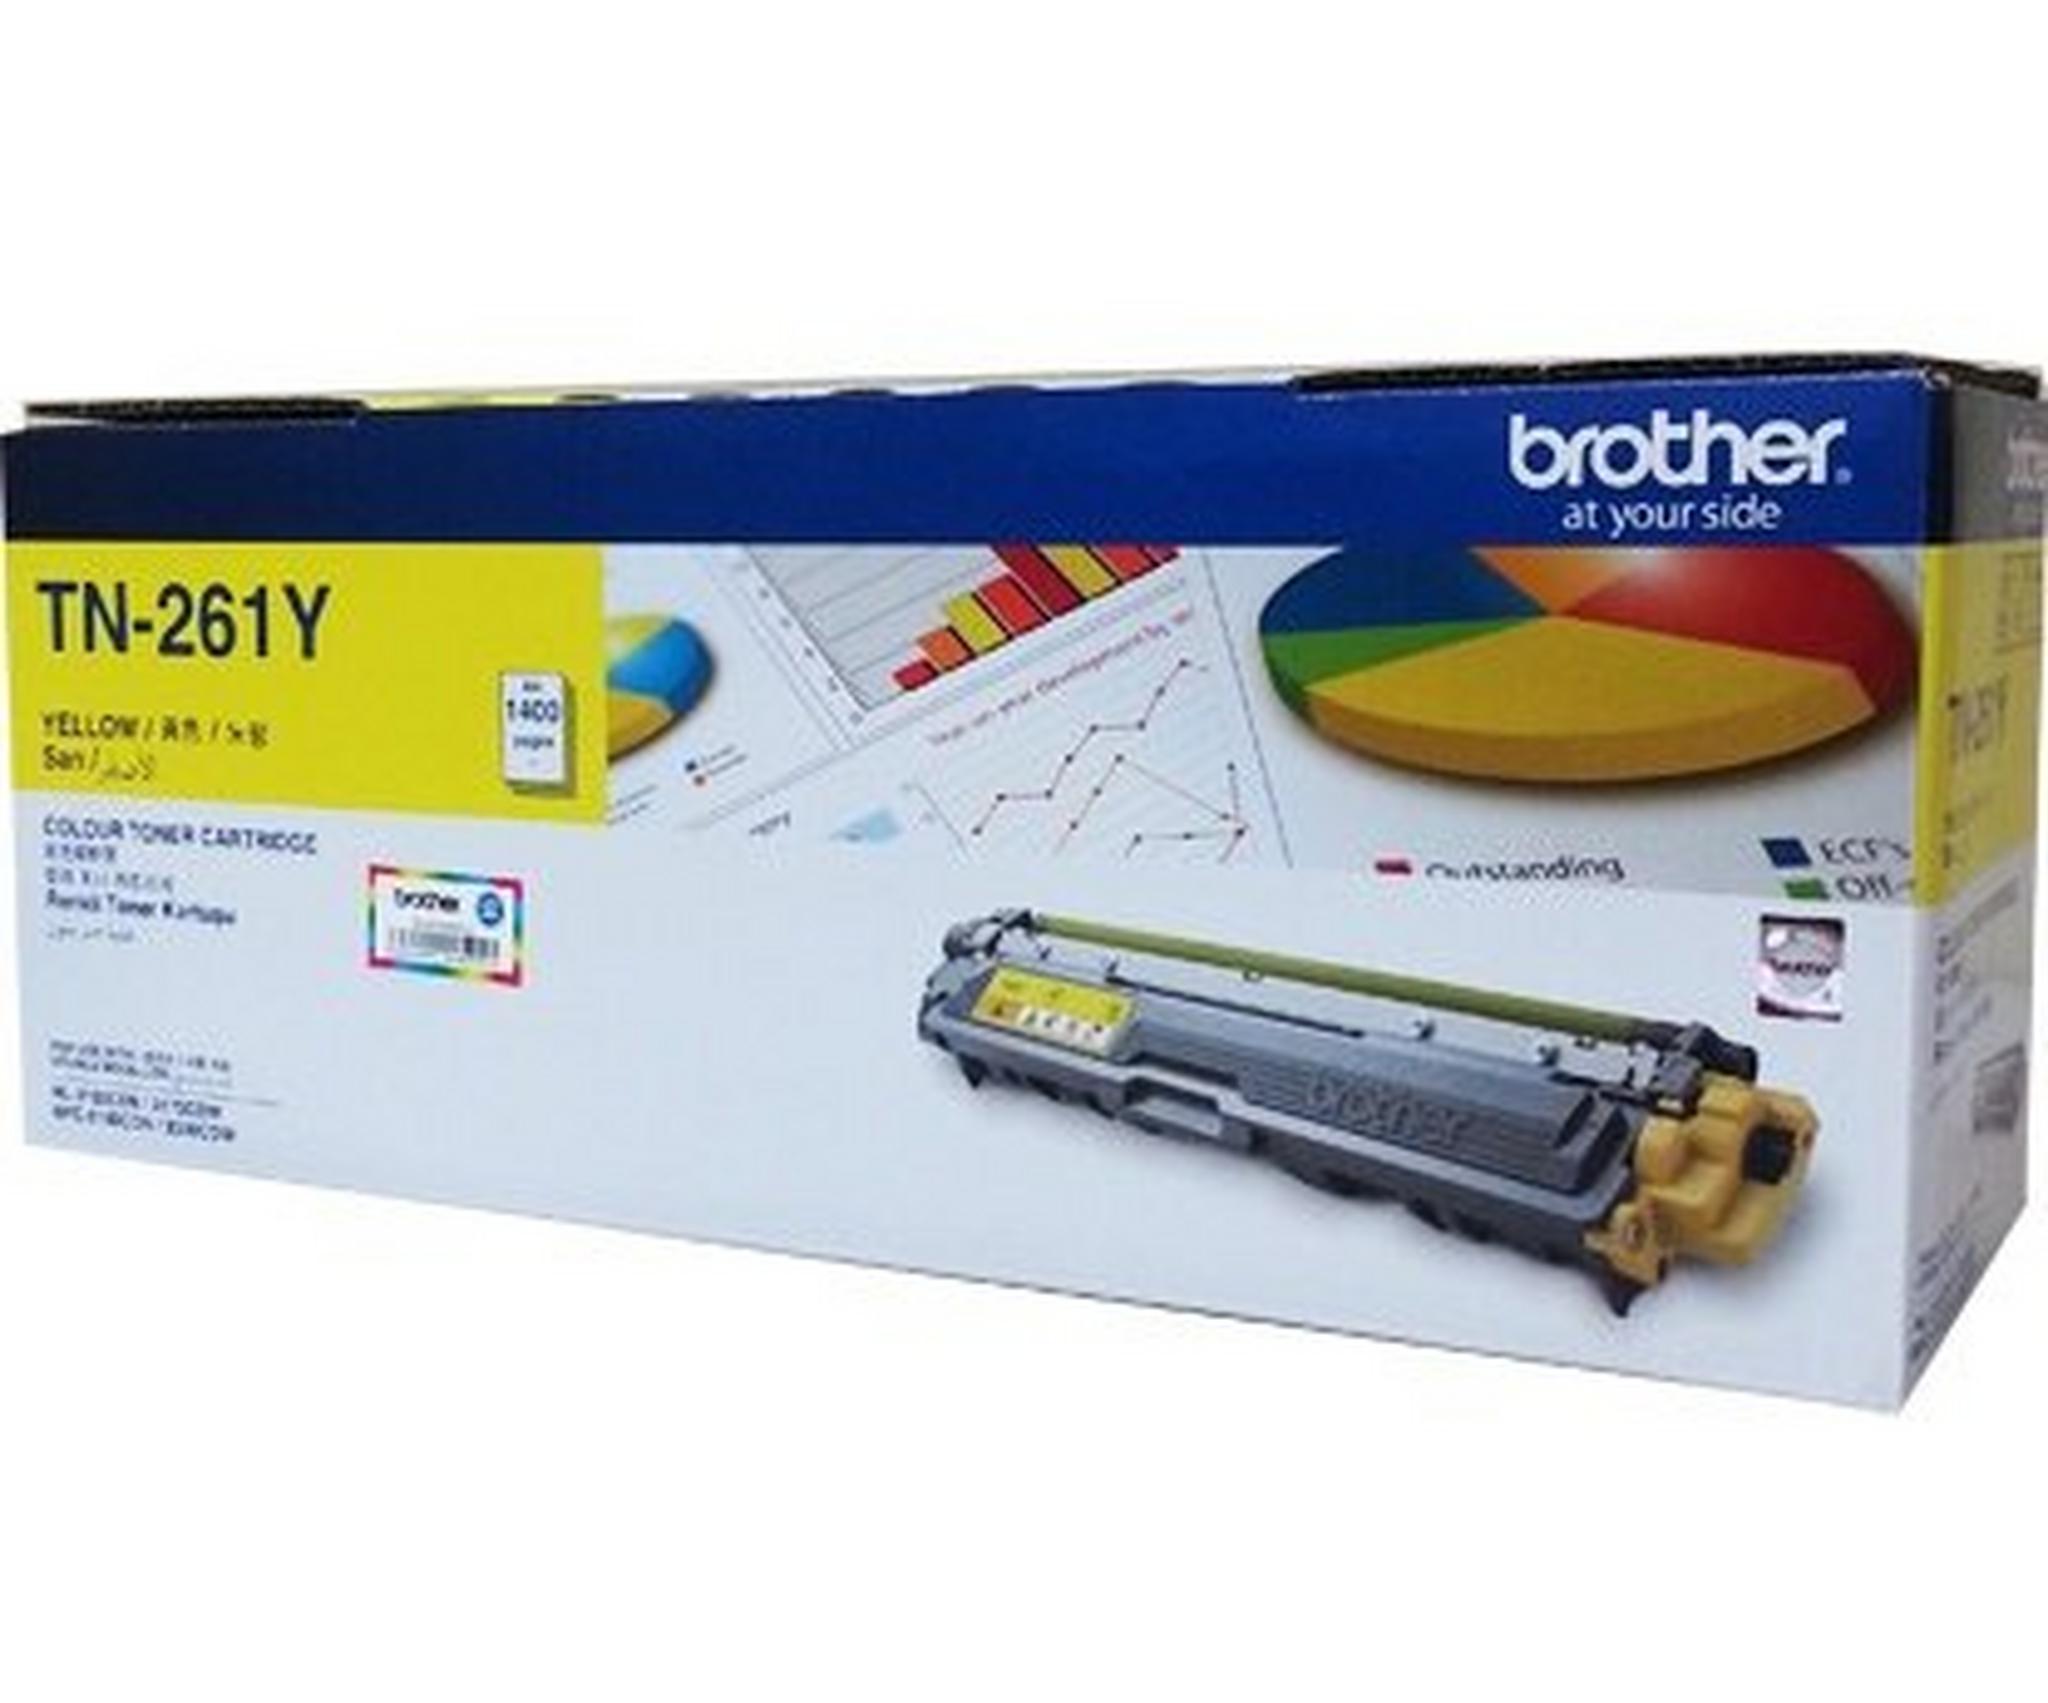 BROTHER Toner TN261Y for LaserJet Printing 1400 Page Yield - Yellow (Single Colour Pack)